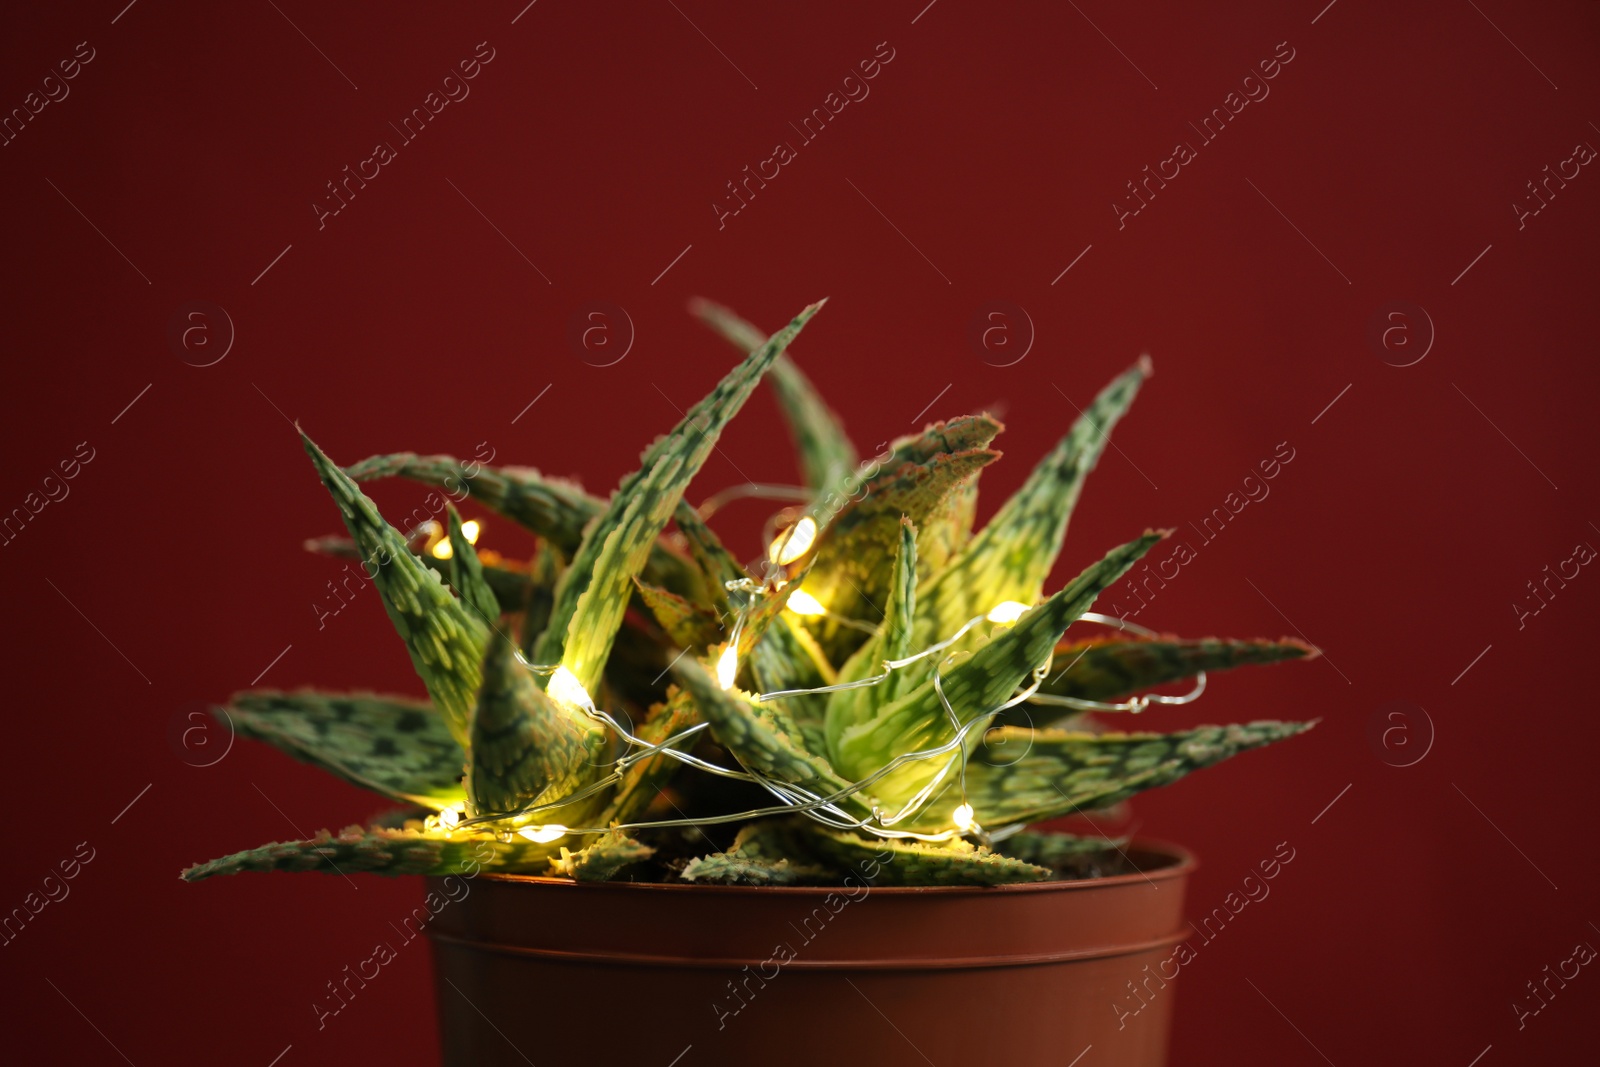 Photo of Cactus decorated with glowing fairy lights on red background, closeup